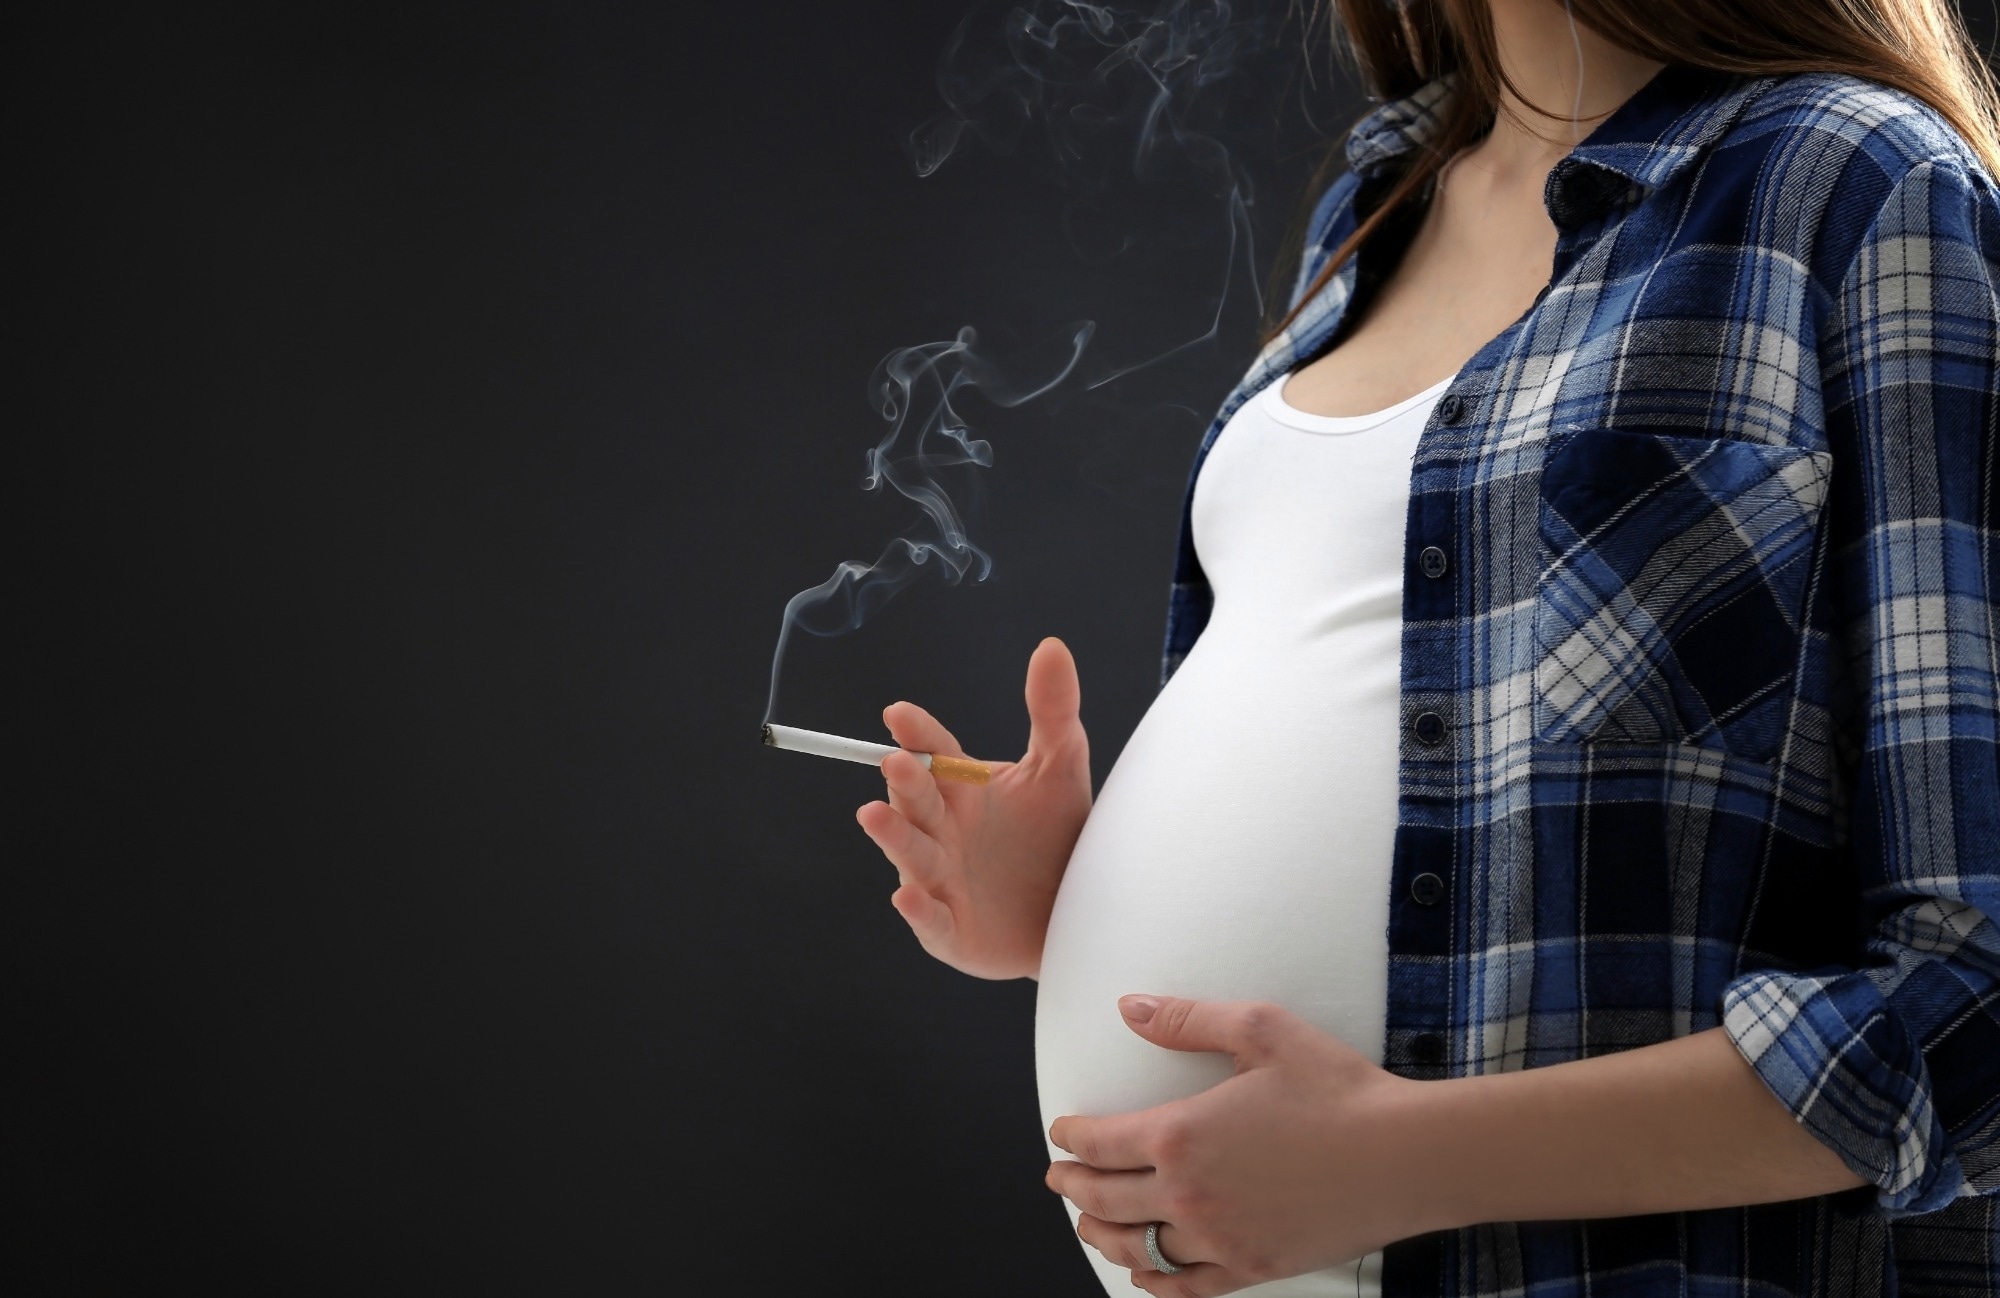 Study: Use of E-cigarettes and cigarettes during late pregnancy among adolescents. Image Credit: Africa Studio / Shutterstock.com